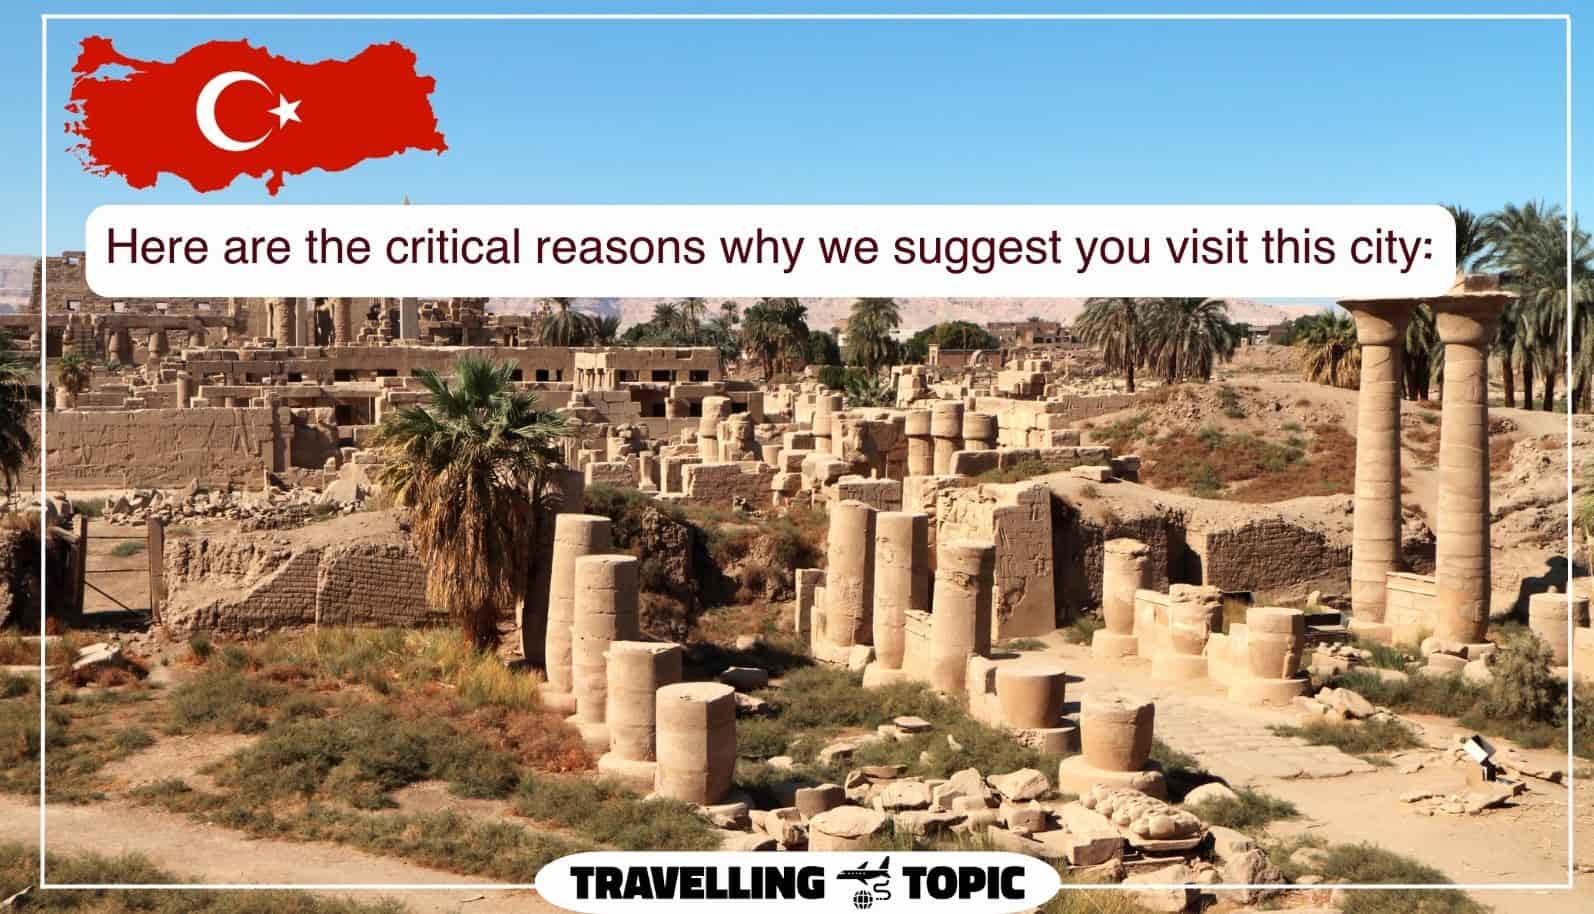 Here are the critical reasons why we suggest you visit this city